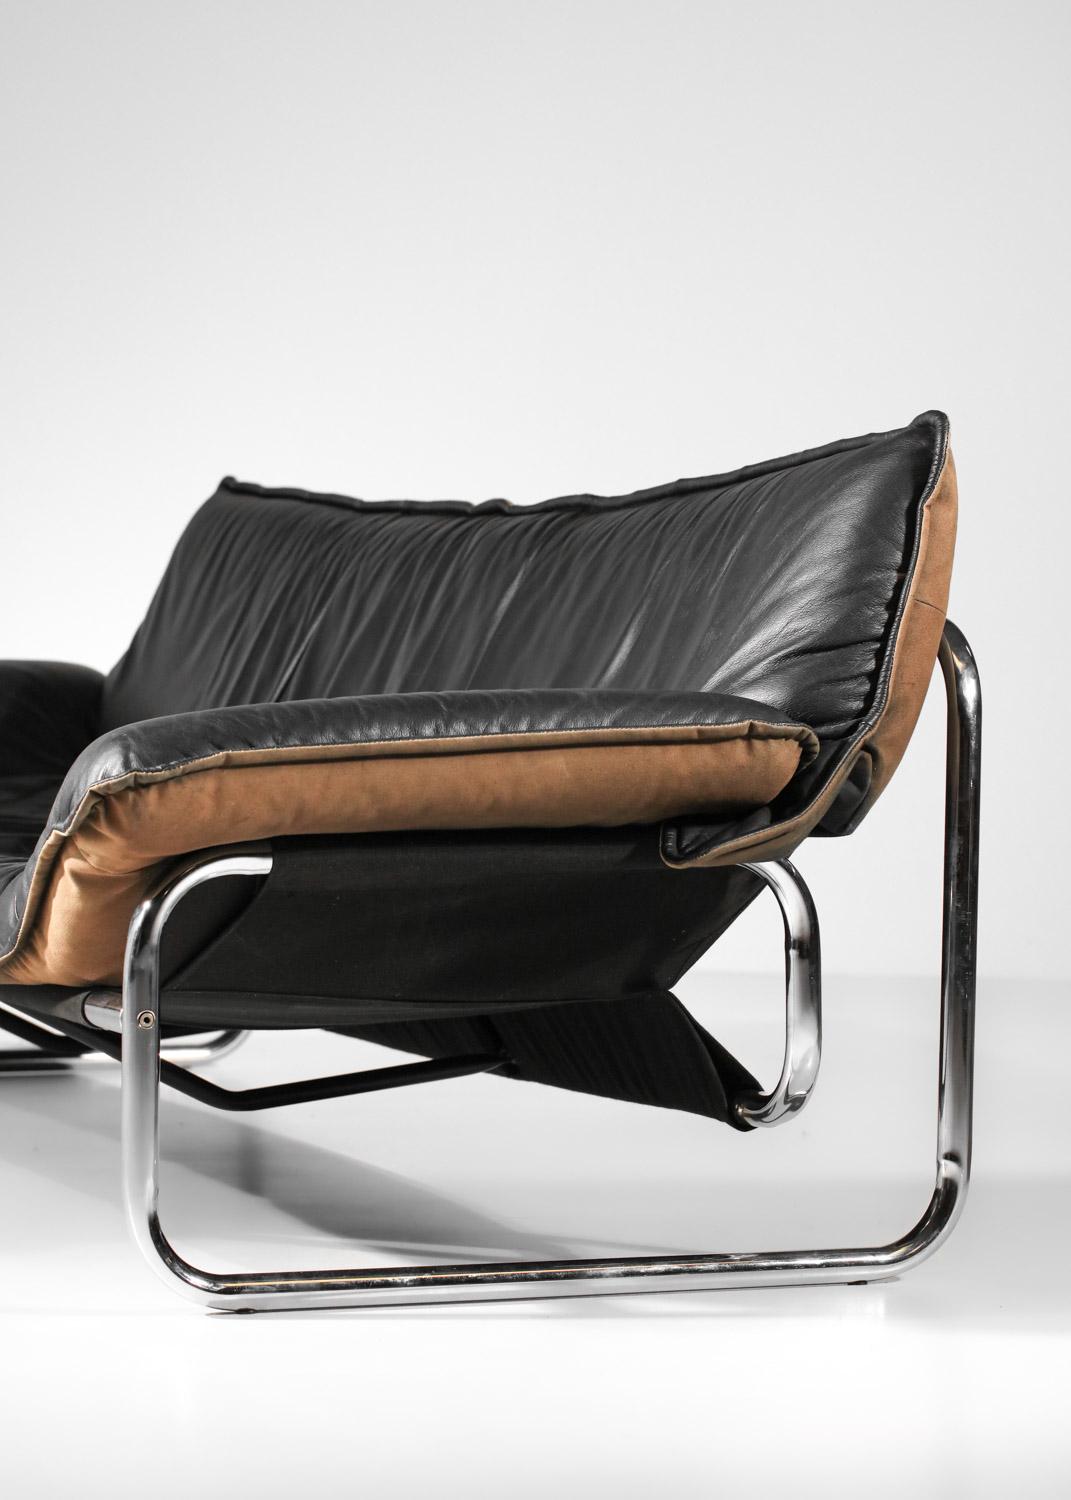 Sofa  by Johan Bertil Haggstrom for ikea 70's in leather and chromed steel 1